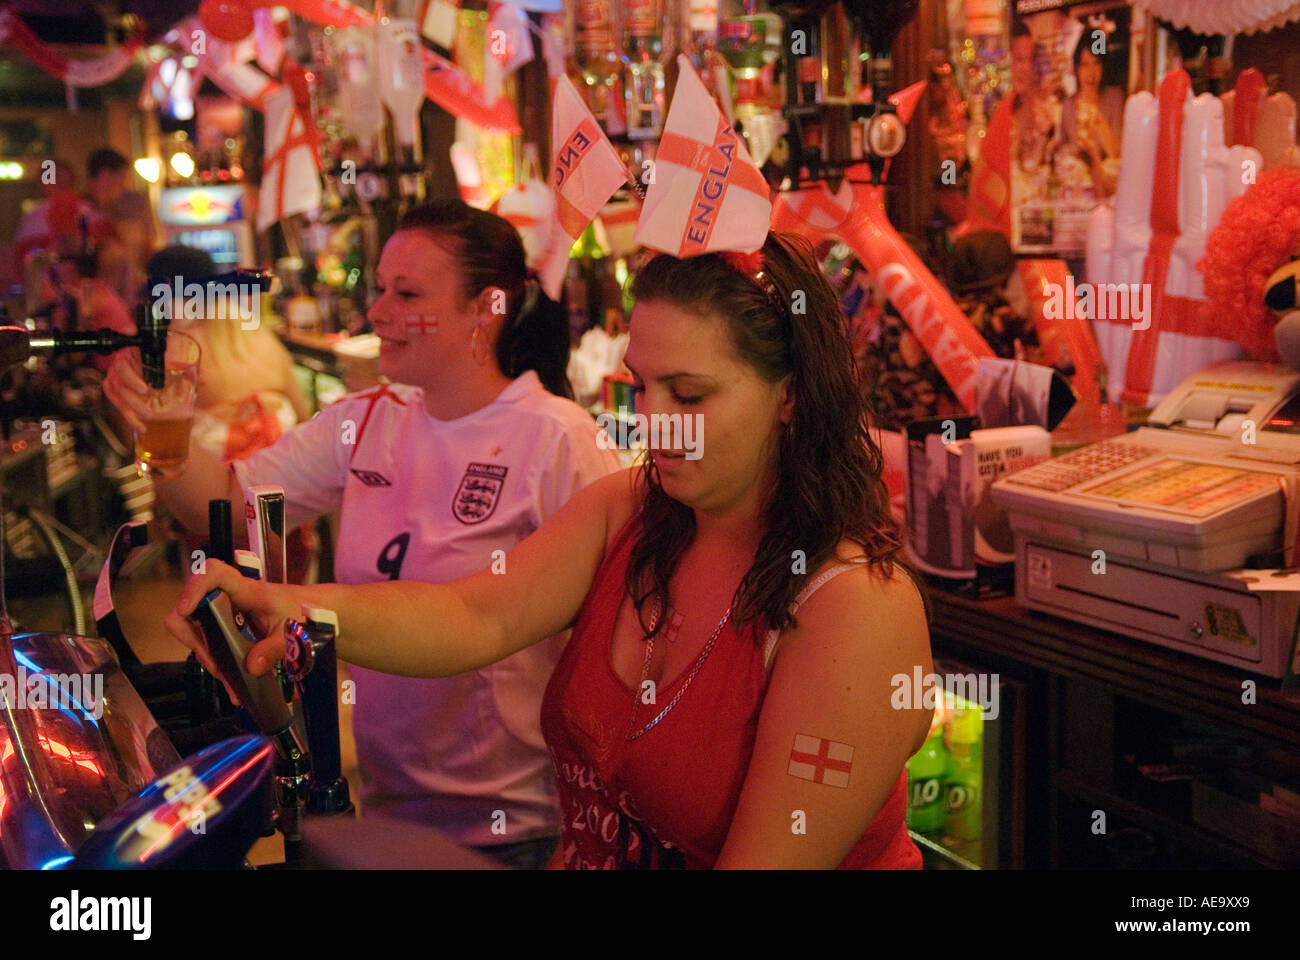 World Cup football match excitement 2006. Pub interior women pulling pints of beer interior decorated with English flags celebrating 2000s HOMER SYKES Stock Photo